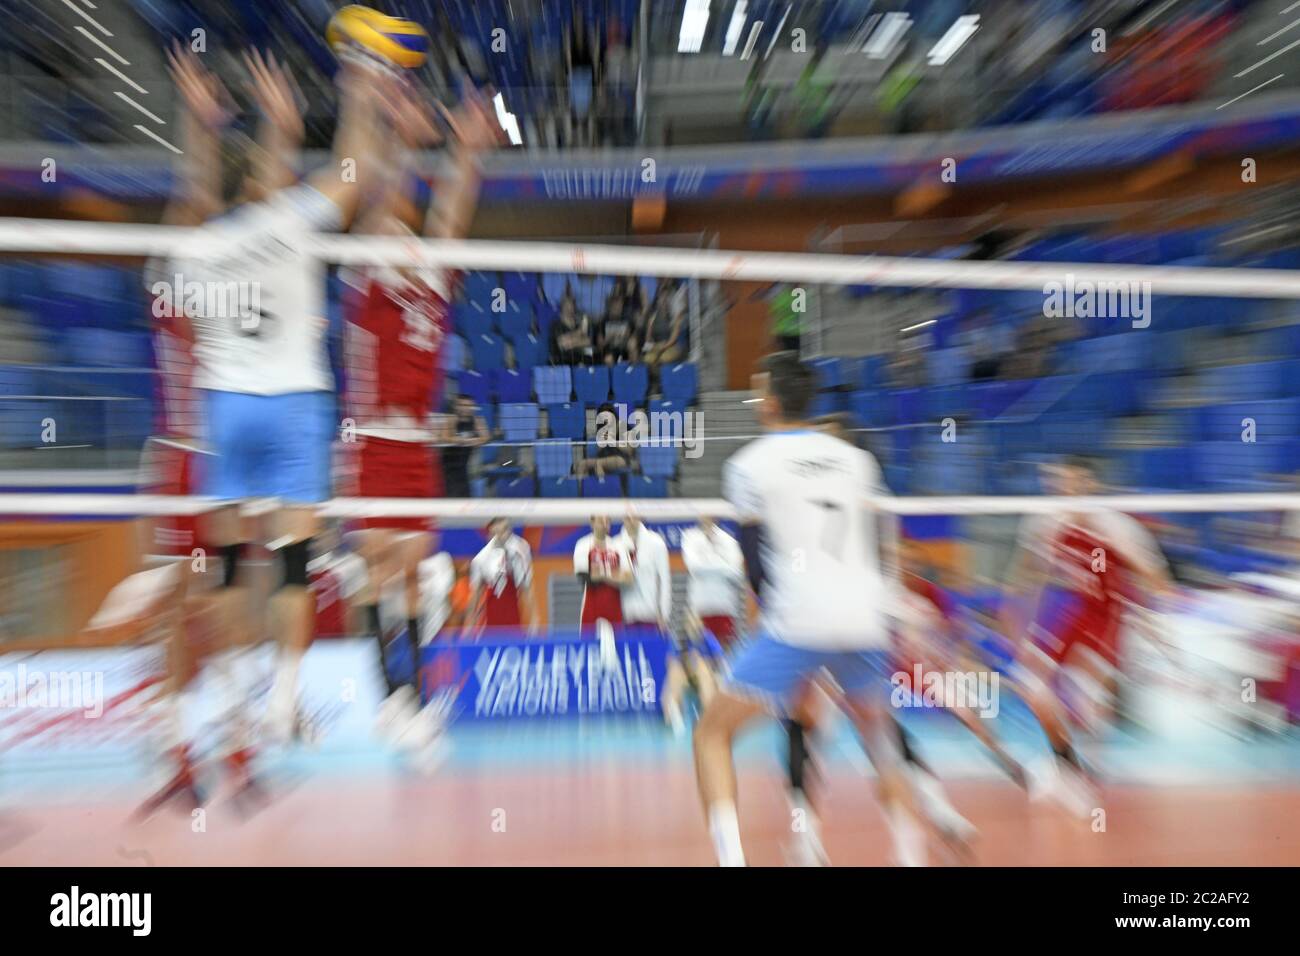 Indoor volleyball players in action, during the international Volleyball Nations League match, Poland vs Argentina, in Milan. Stock Photo